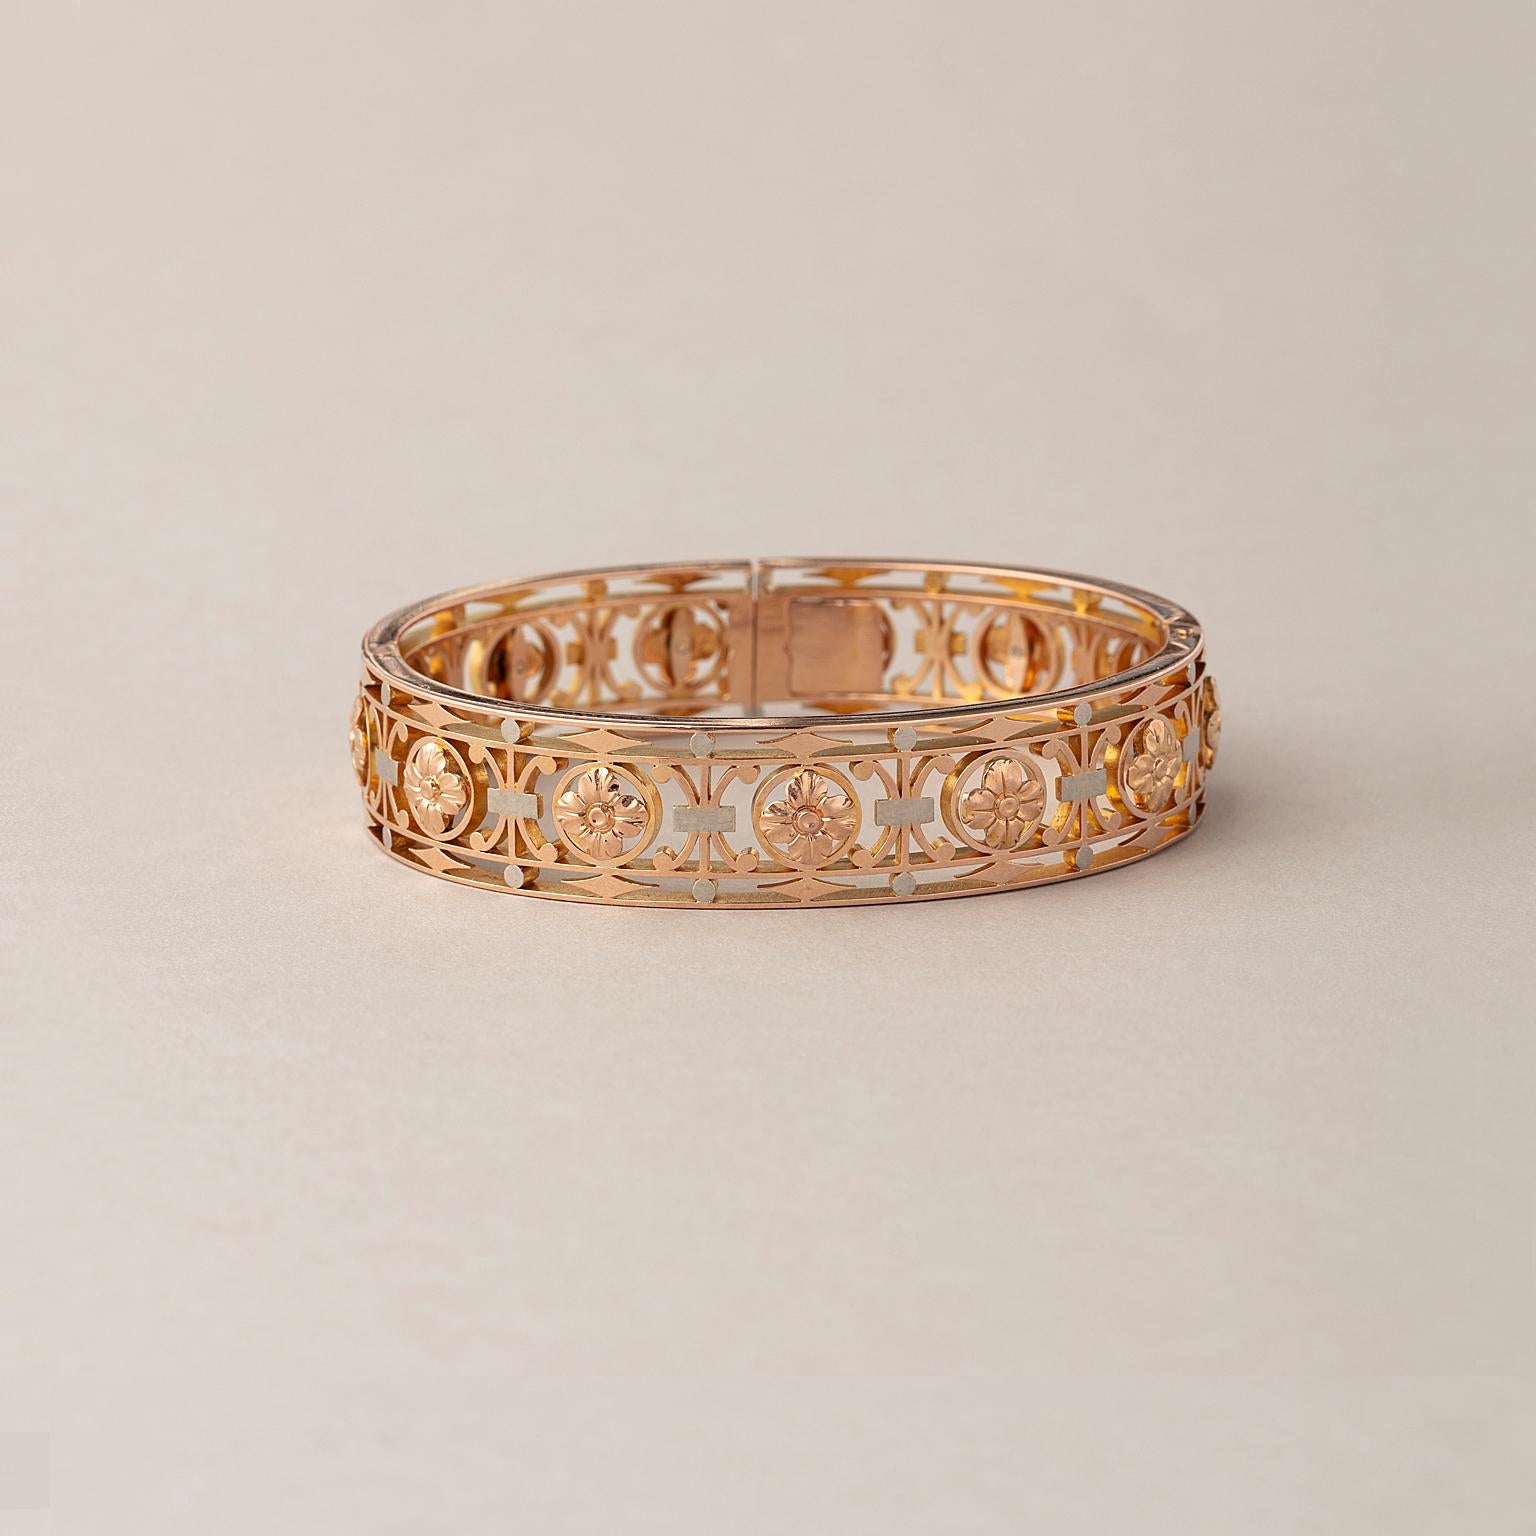 An 18 carat gold bangle with invisible lock opening with two hinges at the back with the decor of a fence with rosettes, kites and scrolls, France, end 19th century.

weight: 38.8 gram
fits a regular wrist